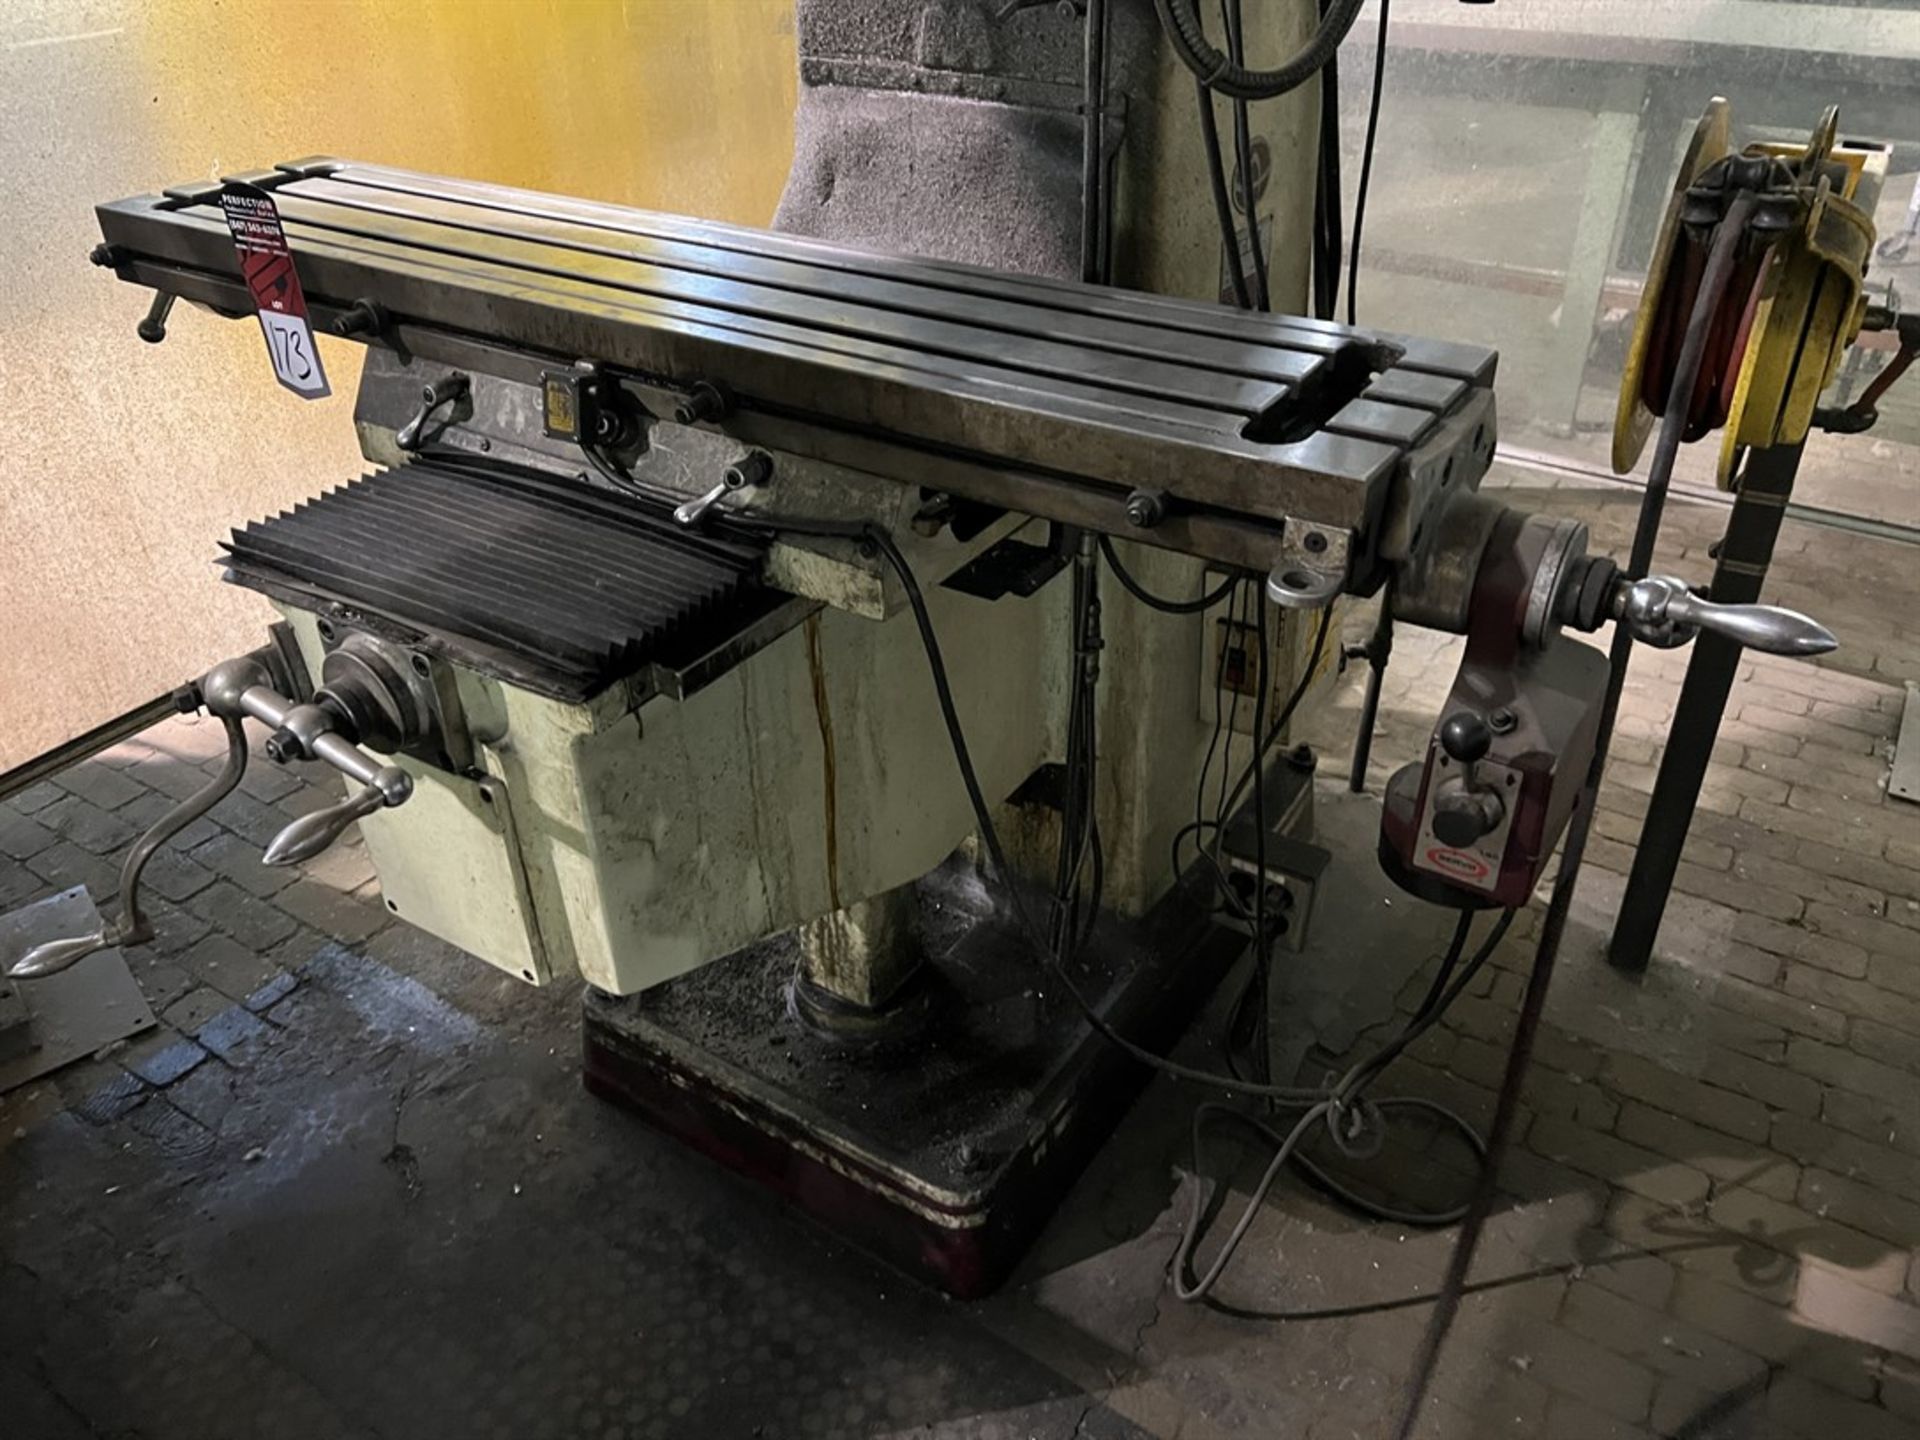 ACER Ultima 3VK Milling Machine, s/n 0819231, 10” x 50” Power Feed Table, 600-4200 RPM, Sony LH51 - Image 3 of 6